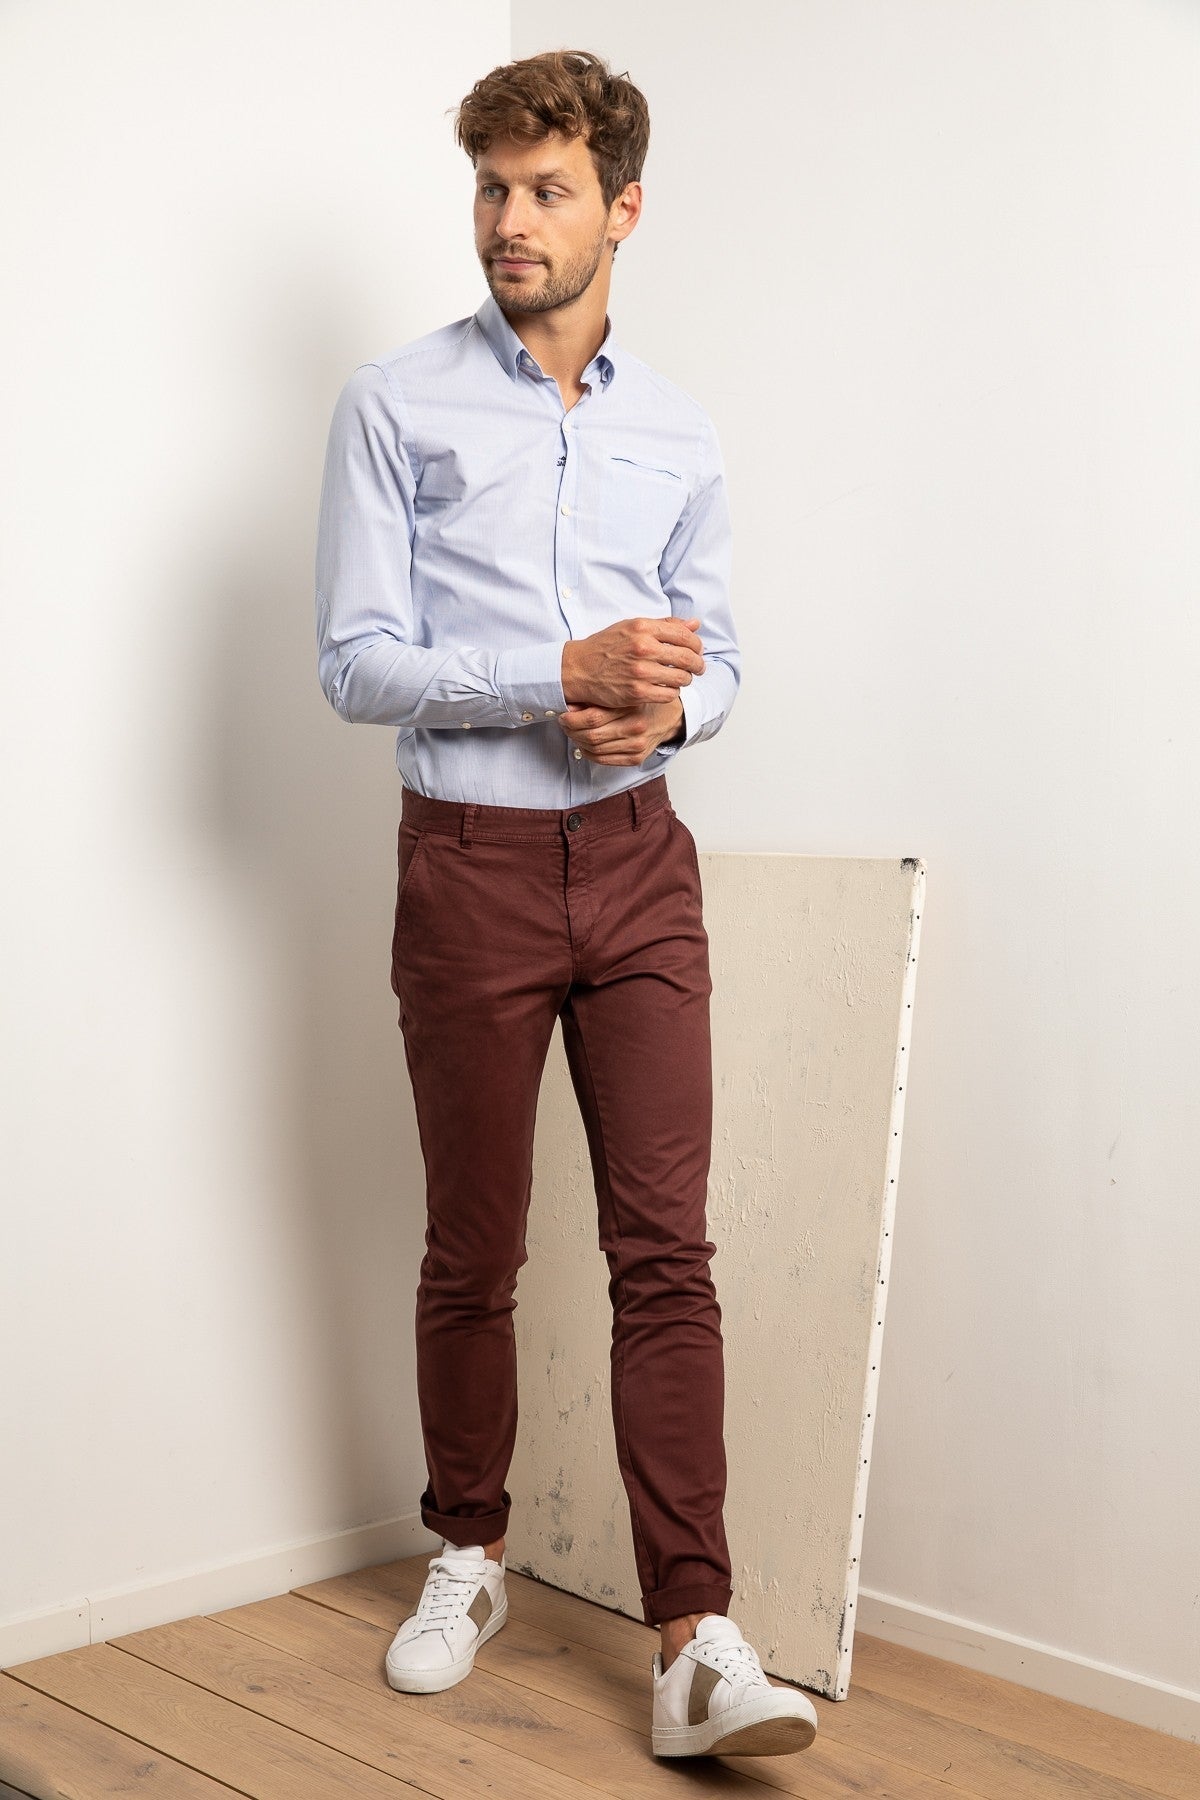 Jaqk - Burgundy Trousers - Walter - The Good Chic